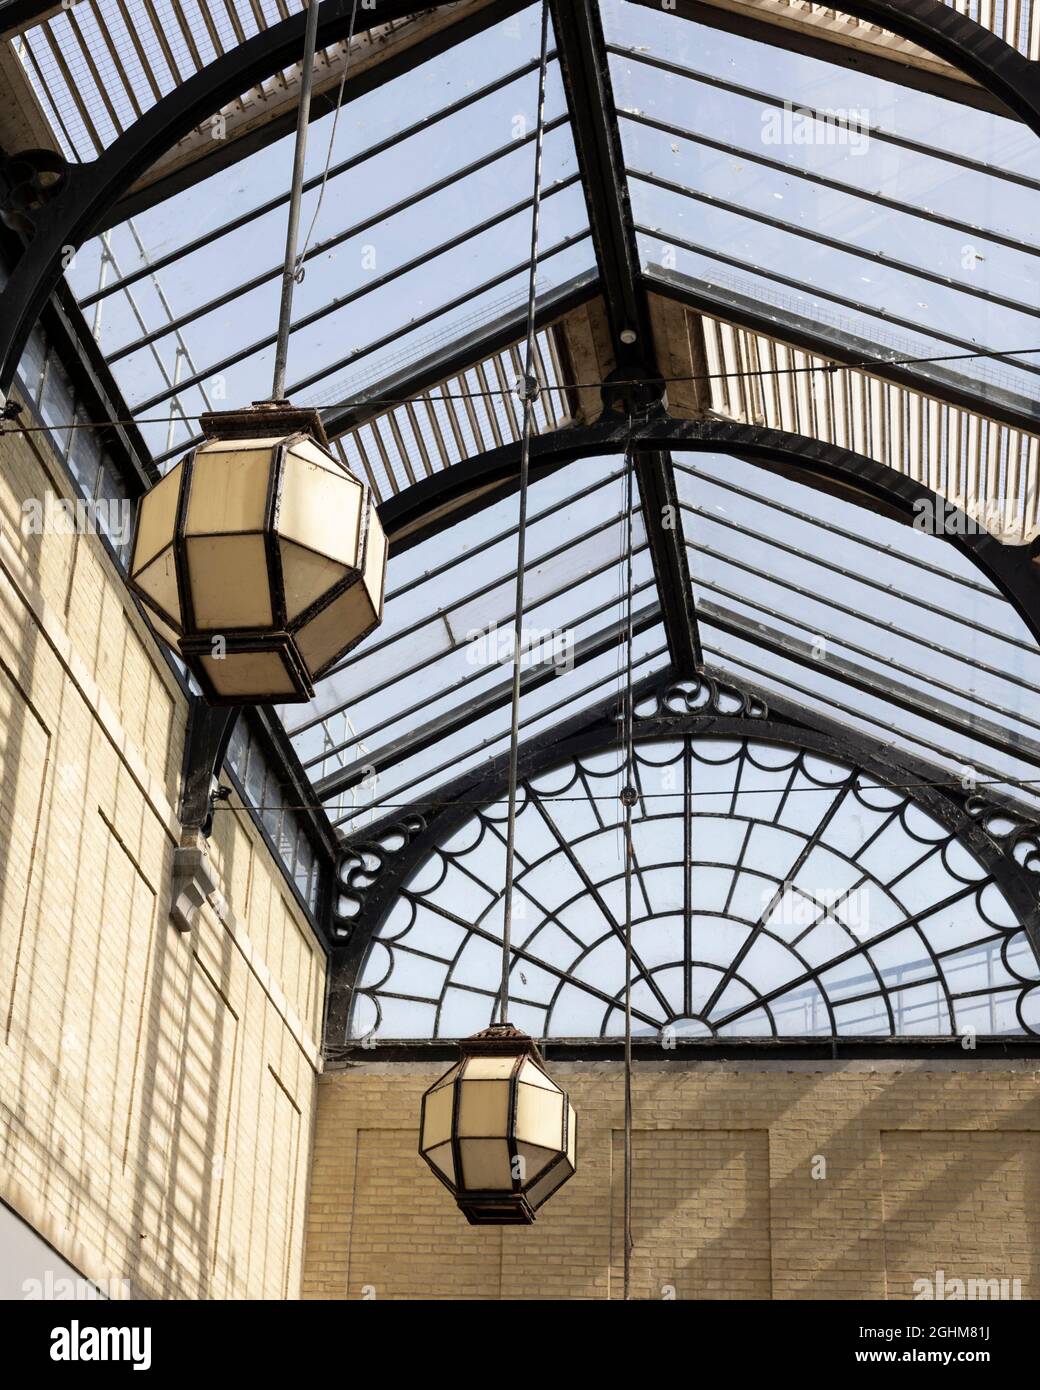 looking up at the lights and roof in the Montague centre, Worthing, West Sussex, 2021 Stock Photo